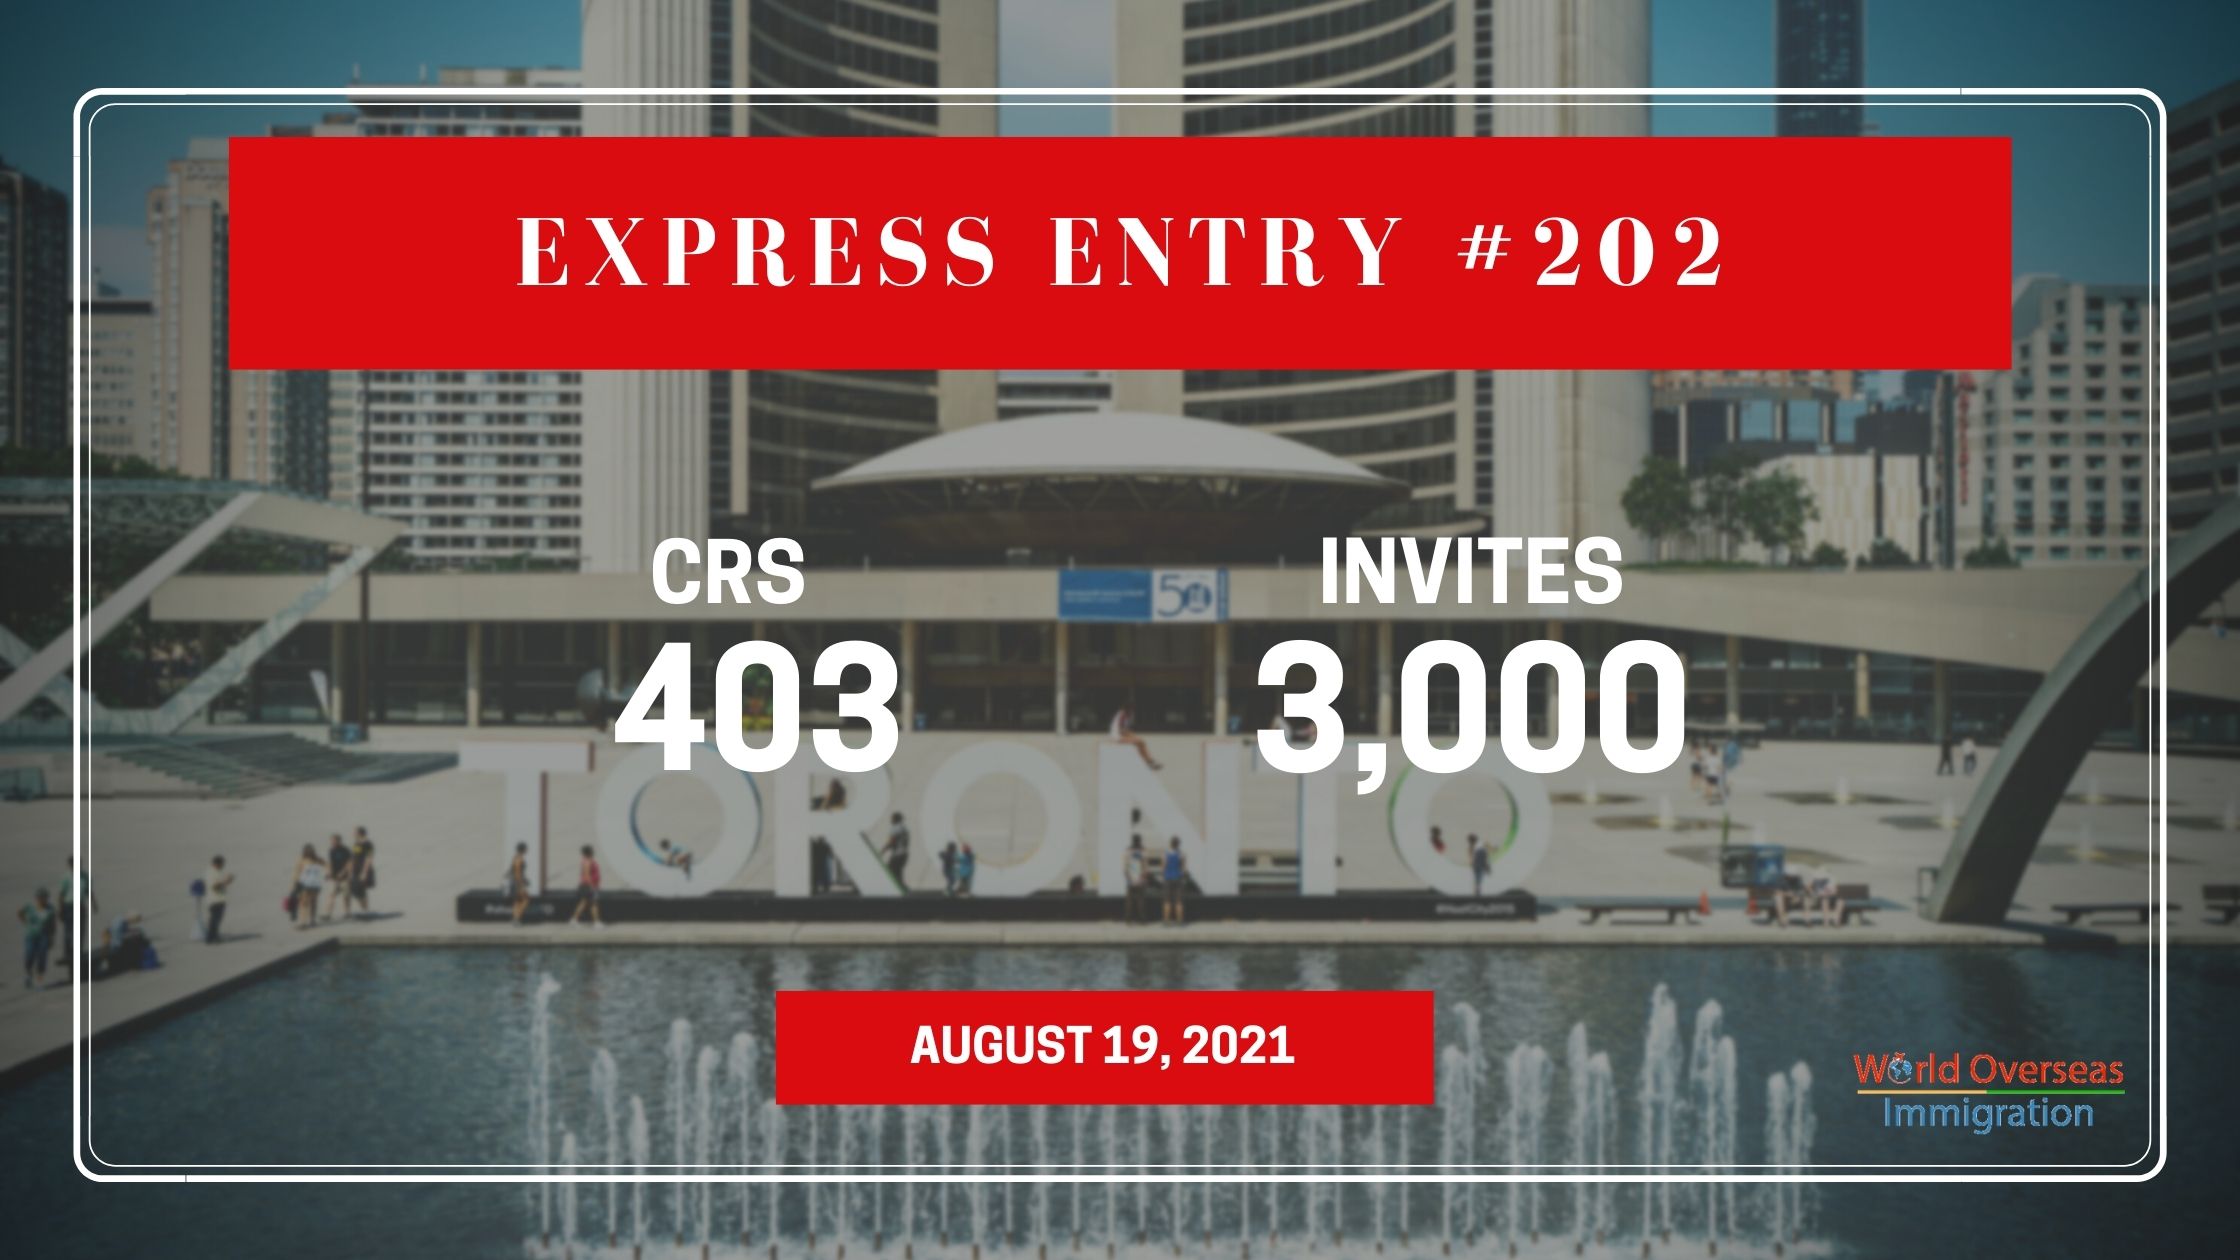 Canada invited Express Entry (CEC) candidates with 403 score